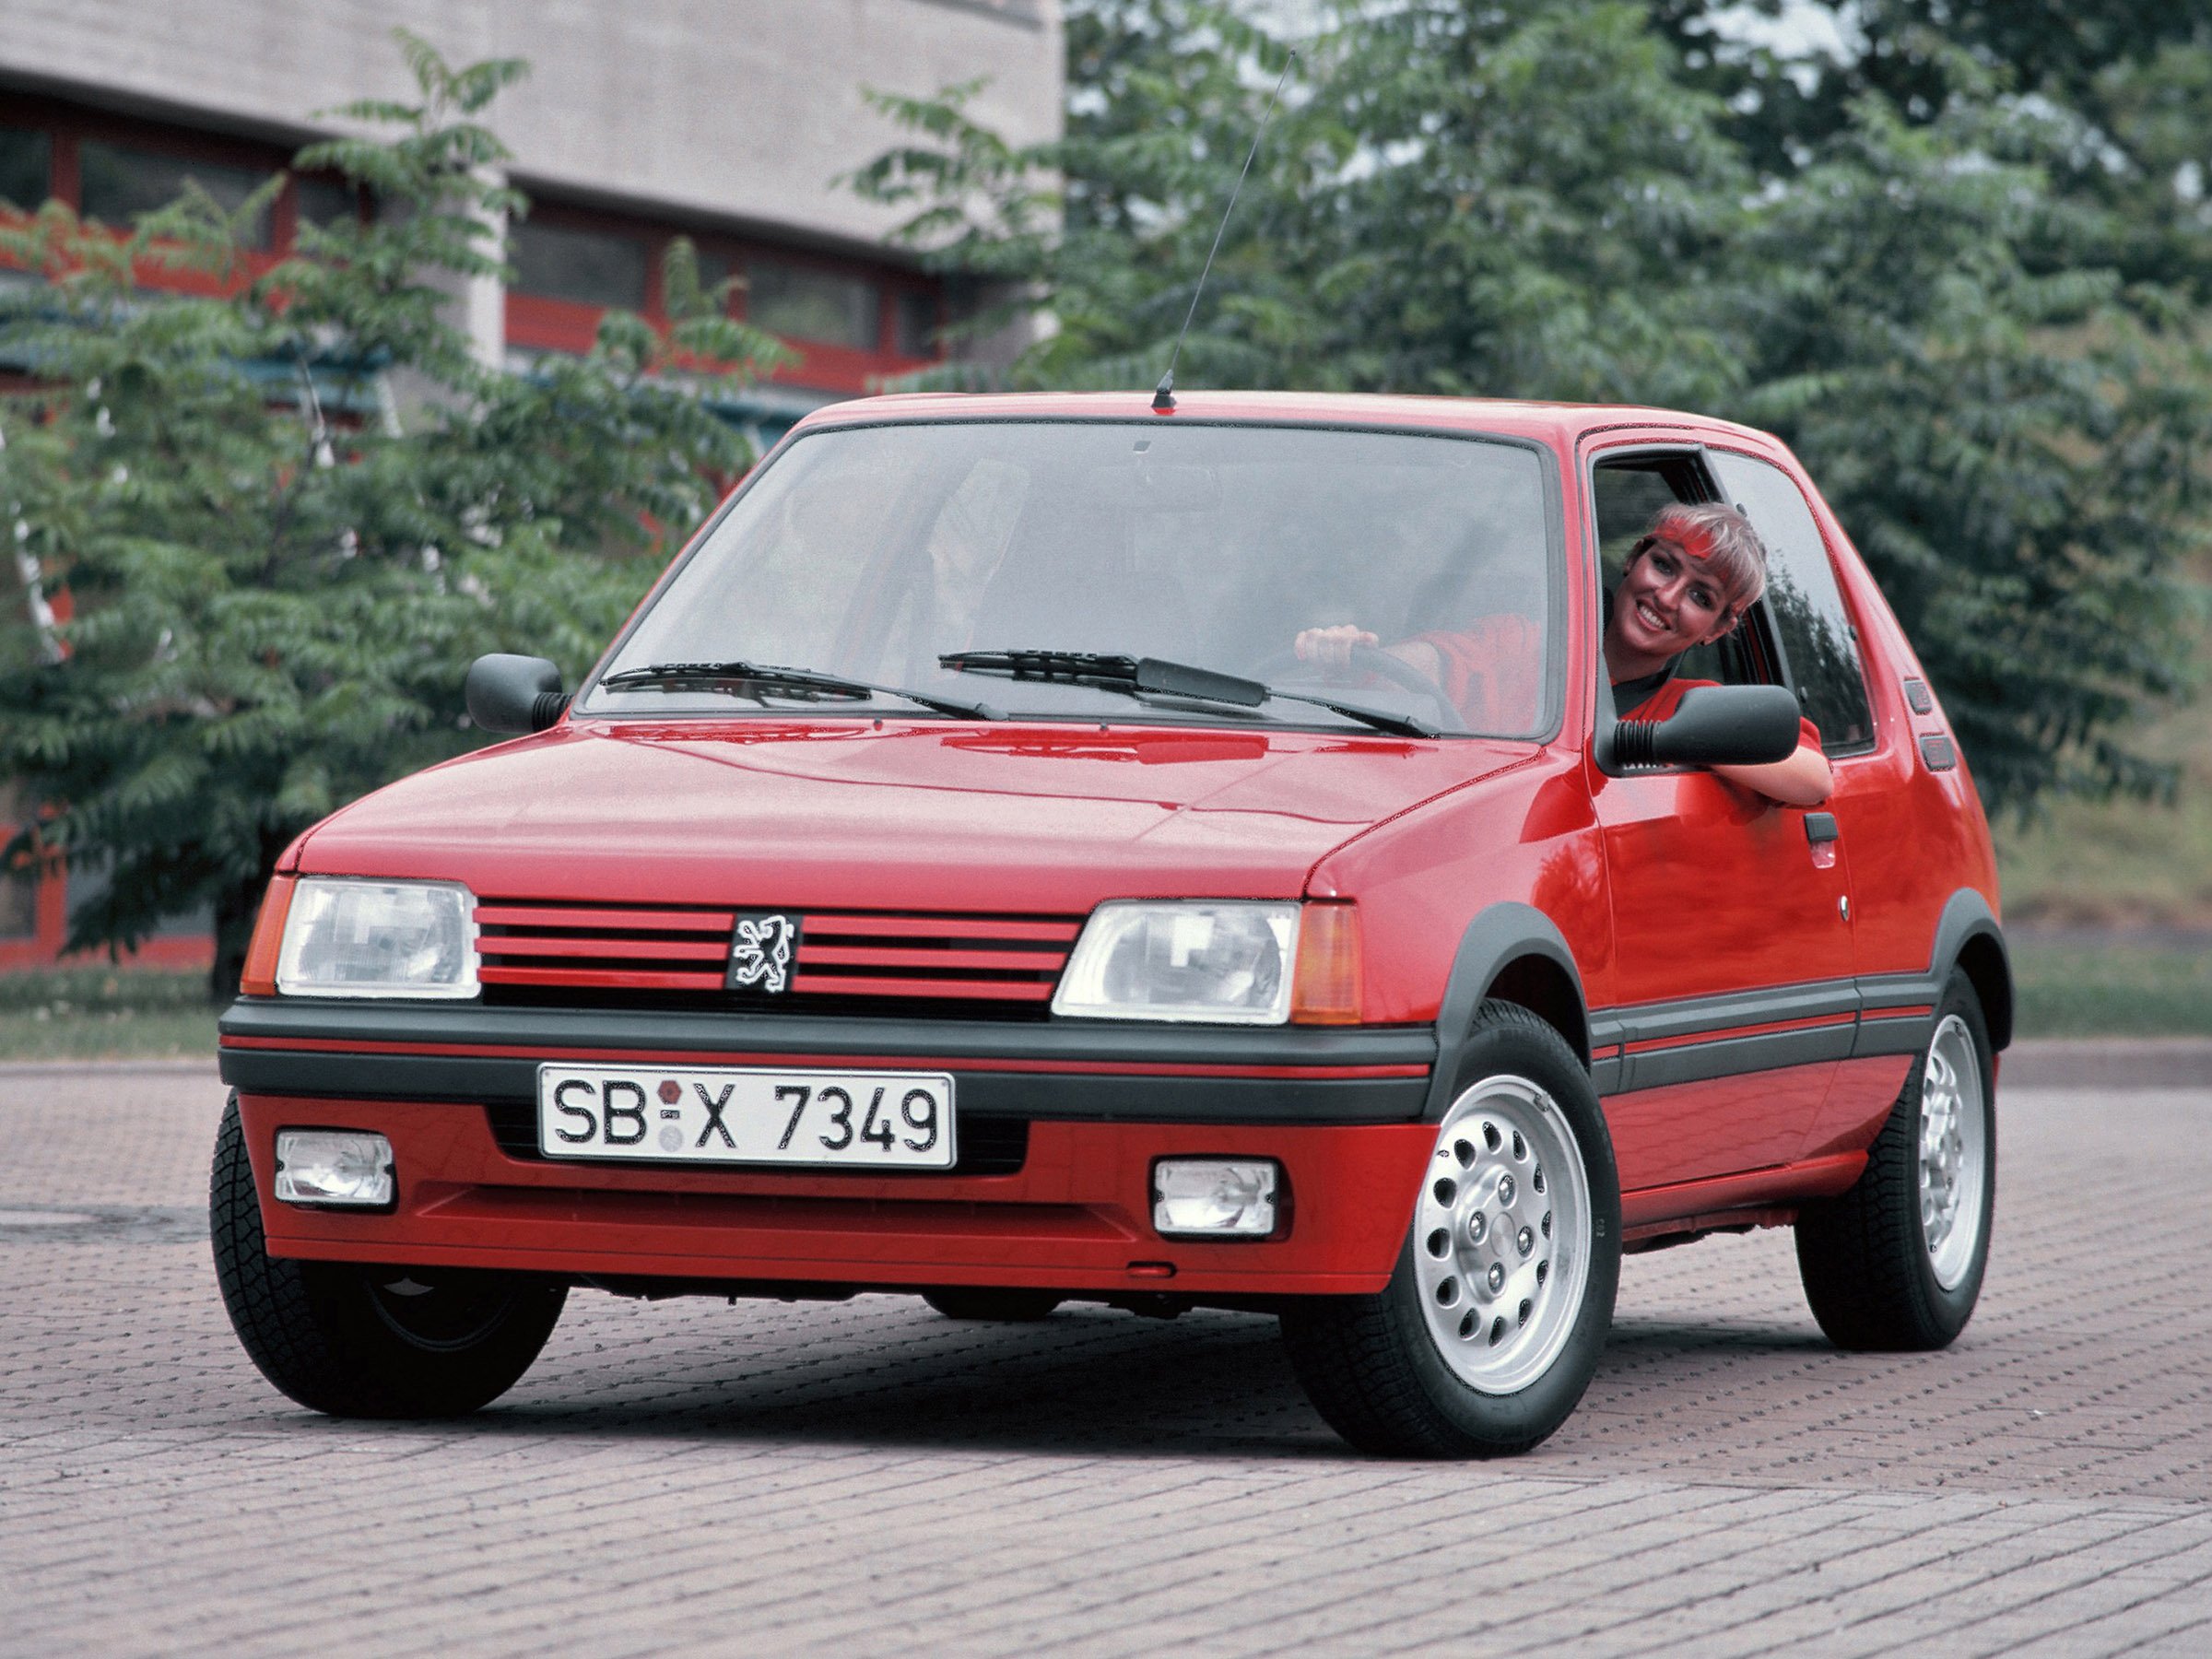 peugeot, 205, 1600, Gti, Cars, French Wallpaper